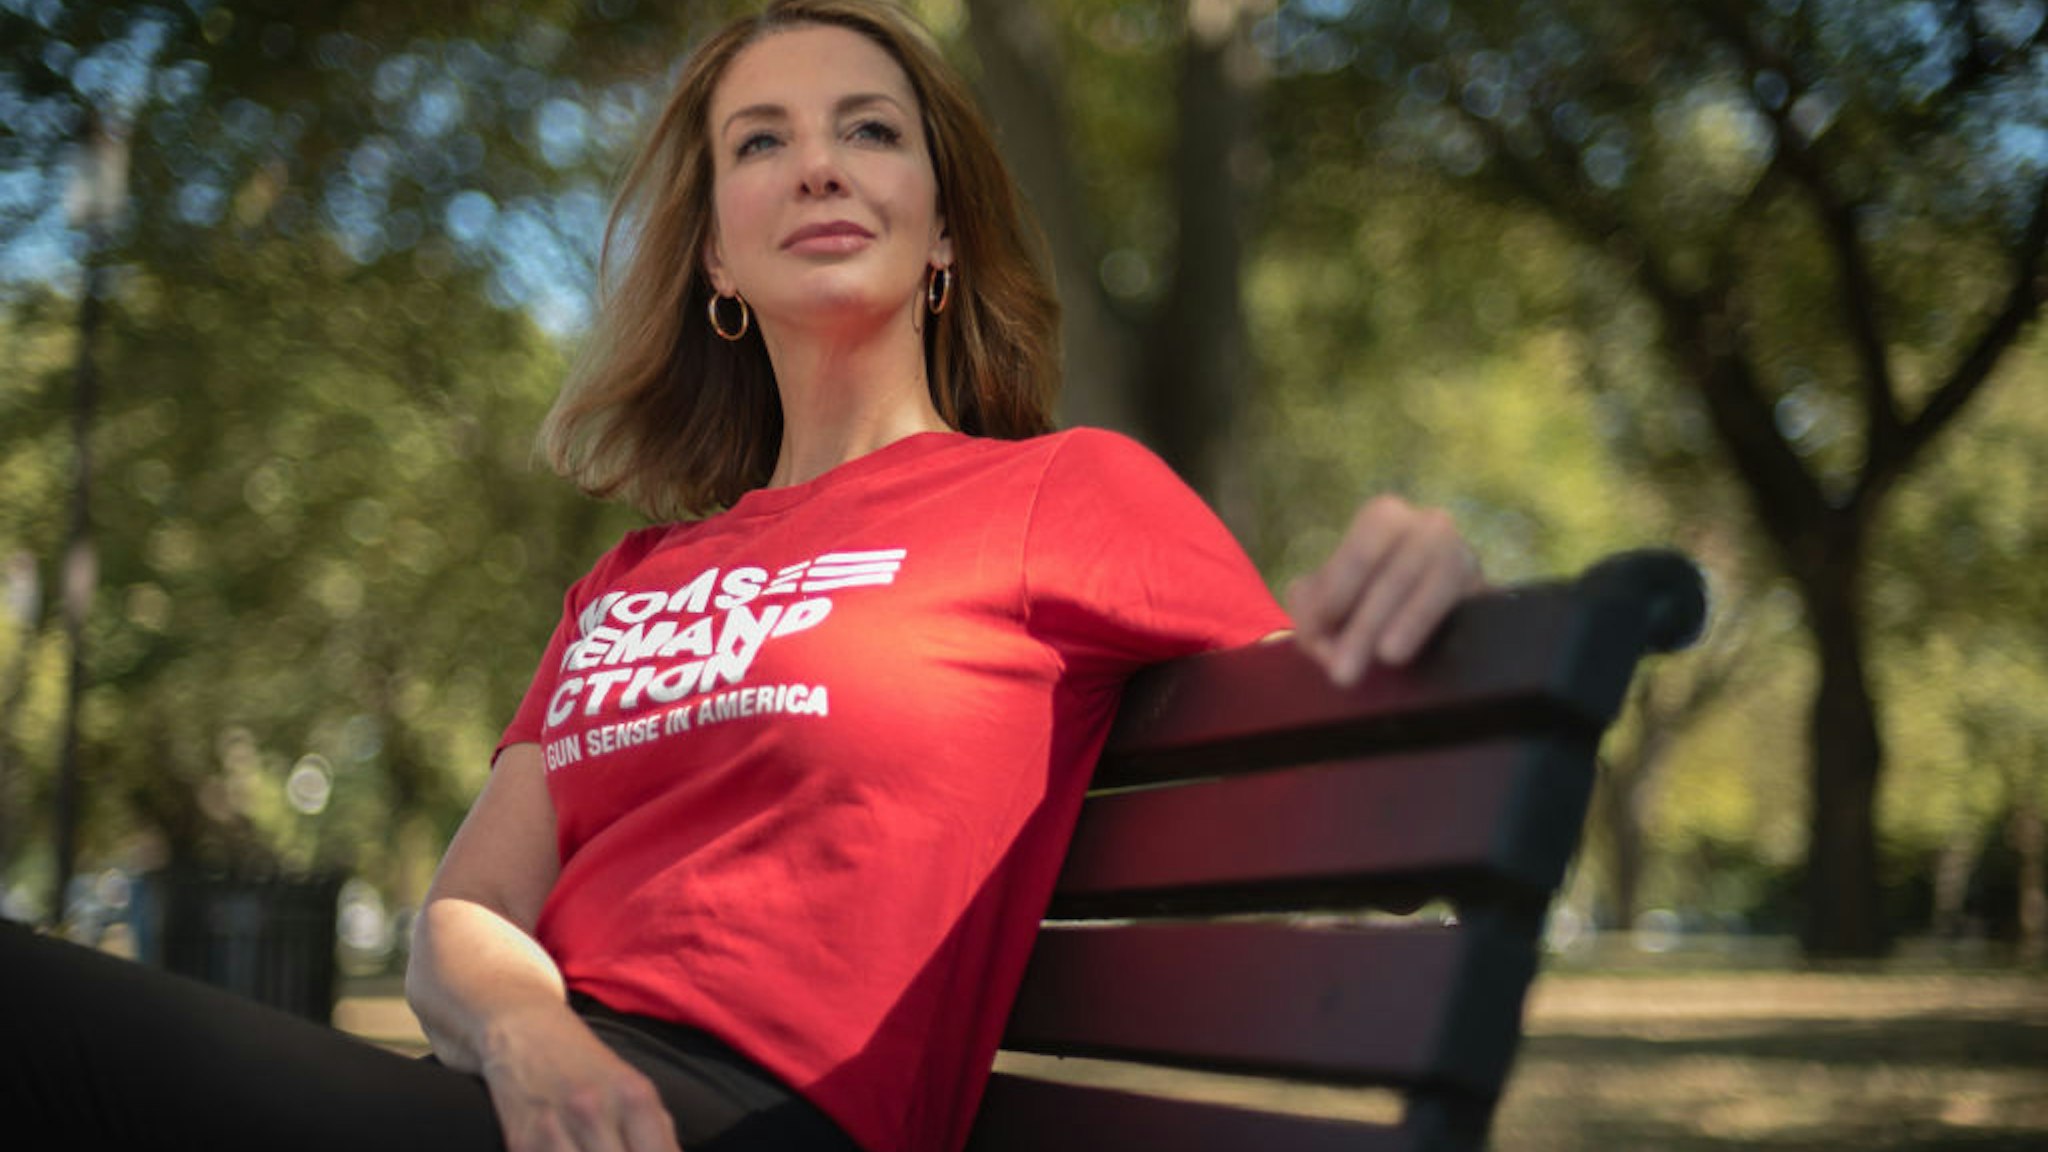 Shannon Watts is the founder of the gun safety group, Moms Demand Action, the nations largest grassroots organization fighting to end gun violence. For Just Asking Profile.